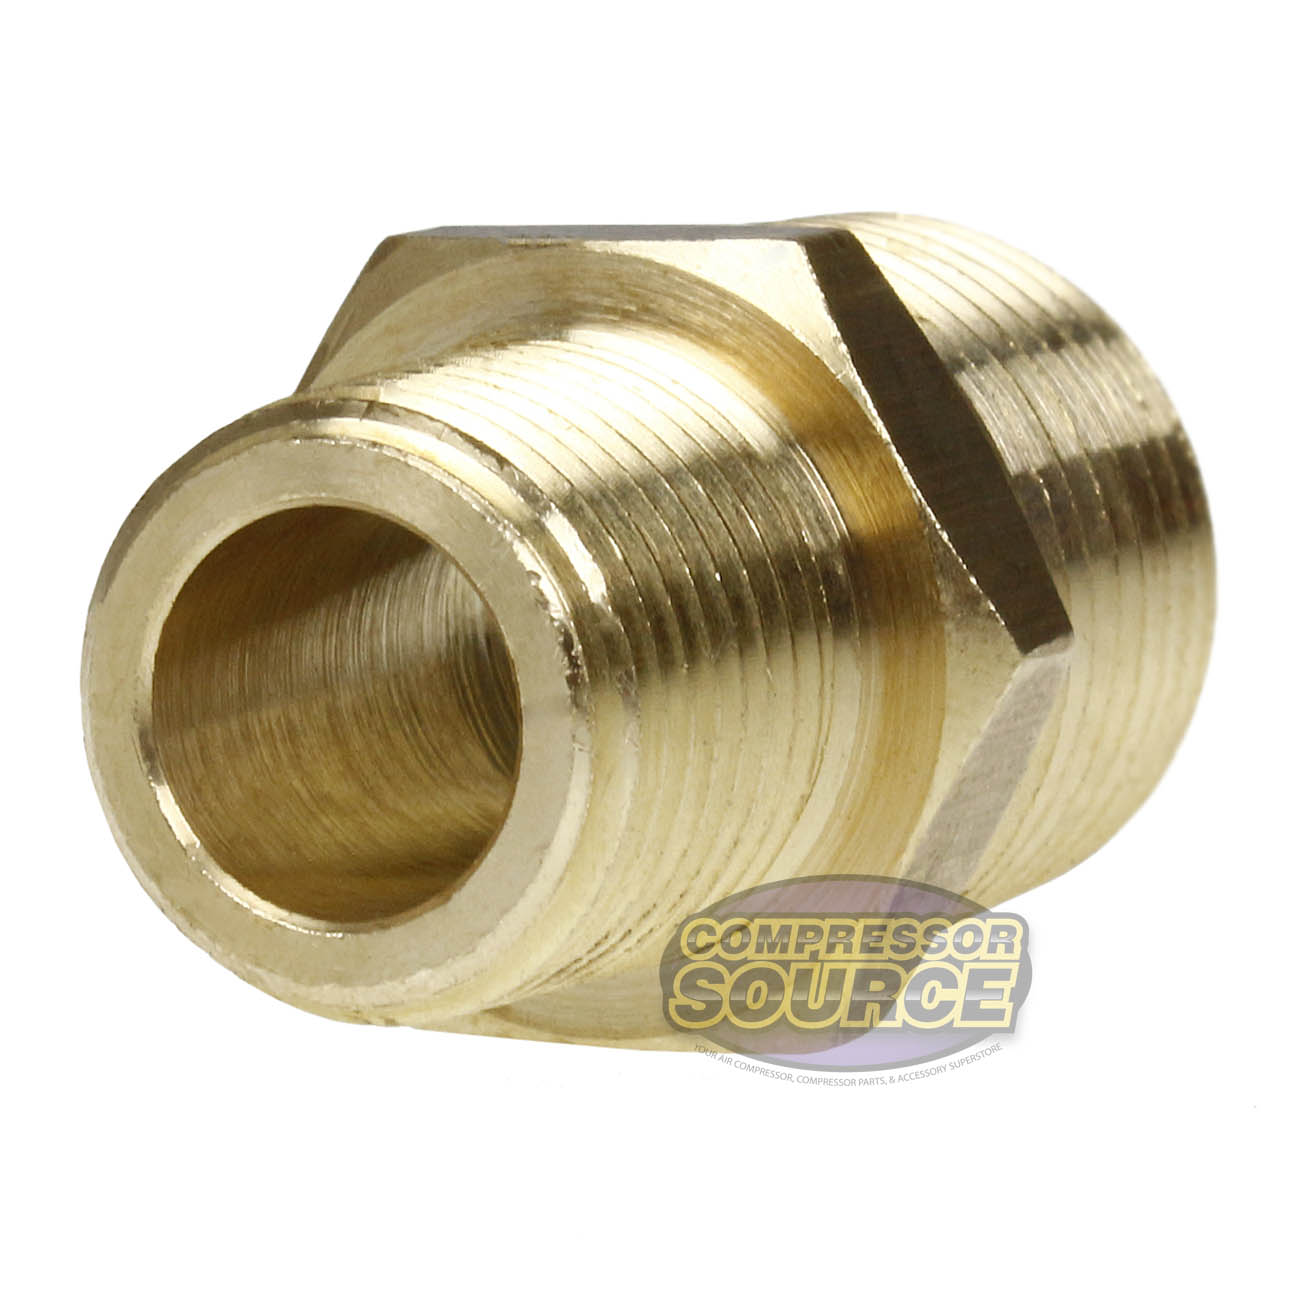 5 Pack 1/2" x 3/8" Male NPTF Pipe Reducing Hex Nipple Solid Brass Pipe Fitting